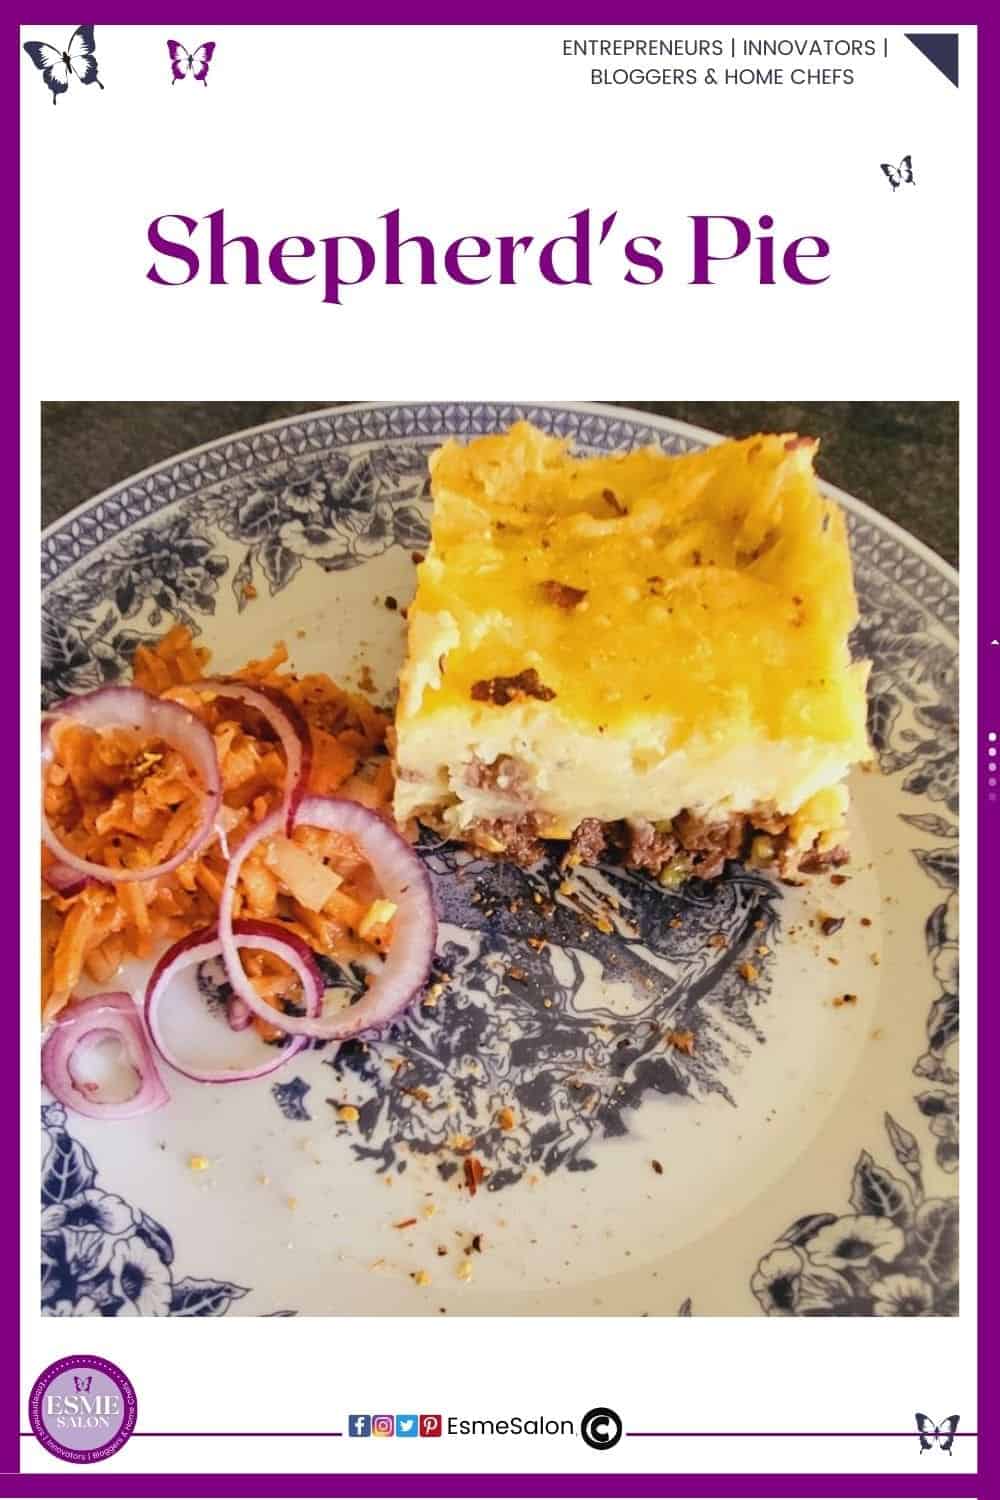 an image of a blue Delft plate with a block of Shepherd's Pie and a side of salad